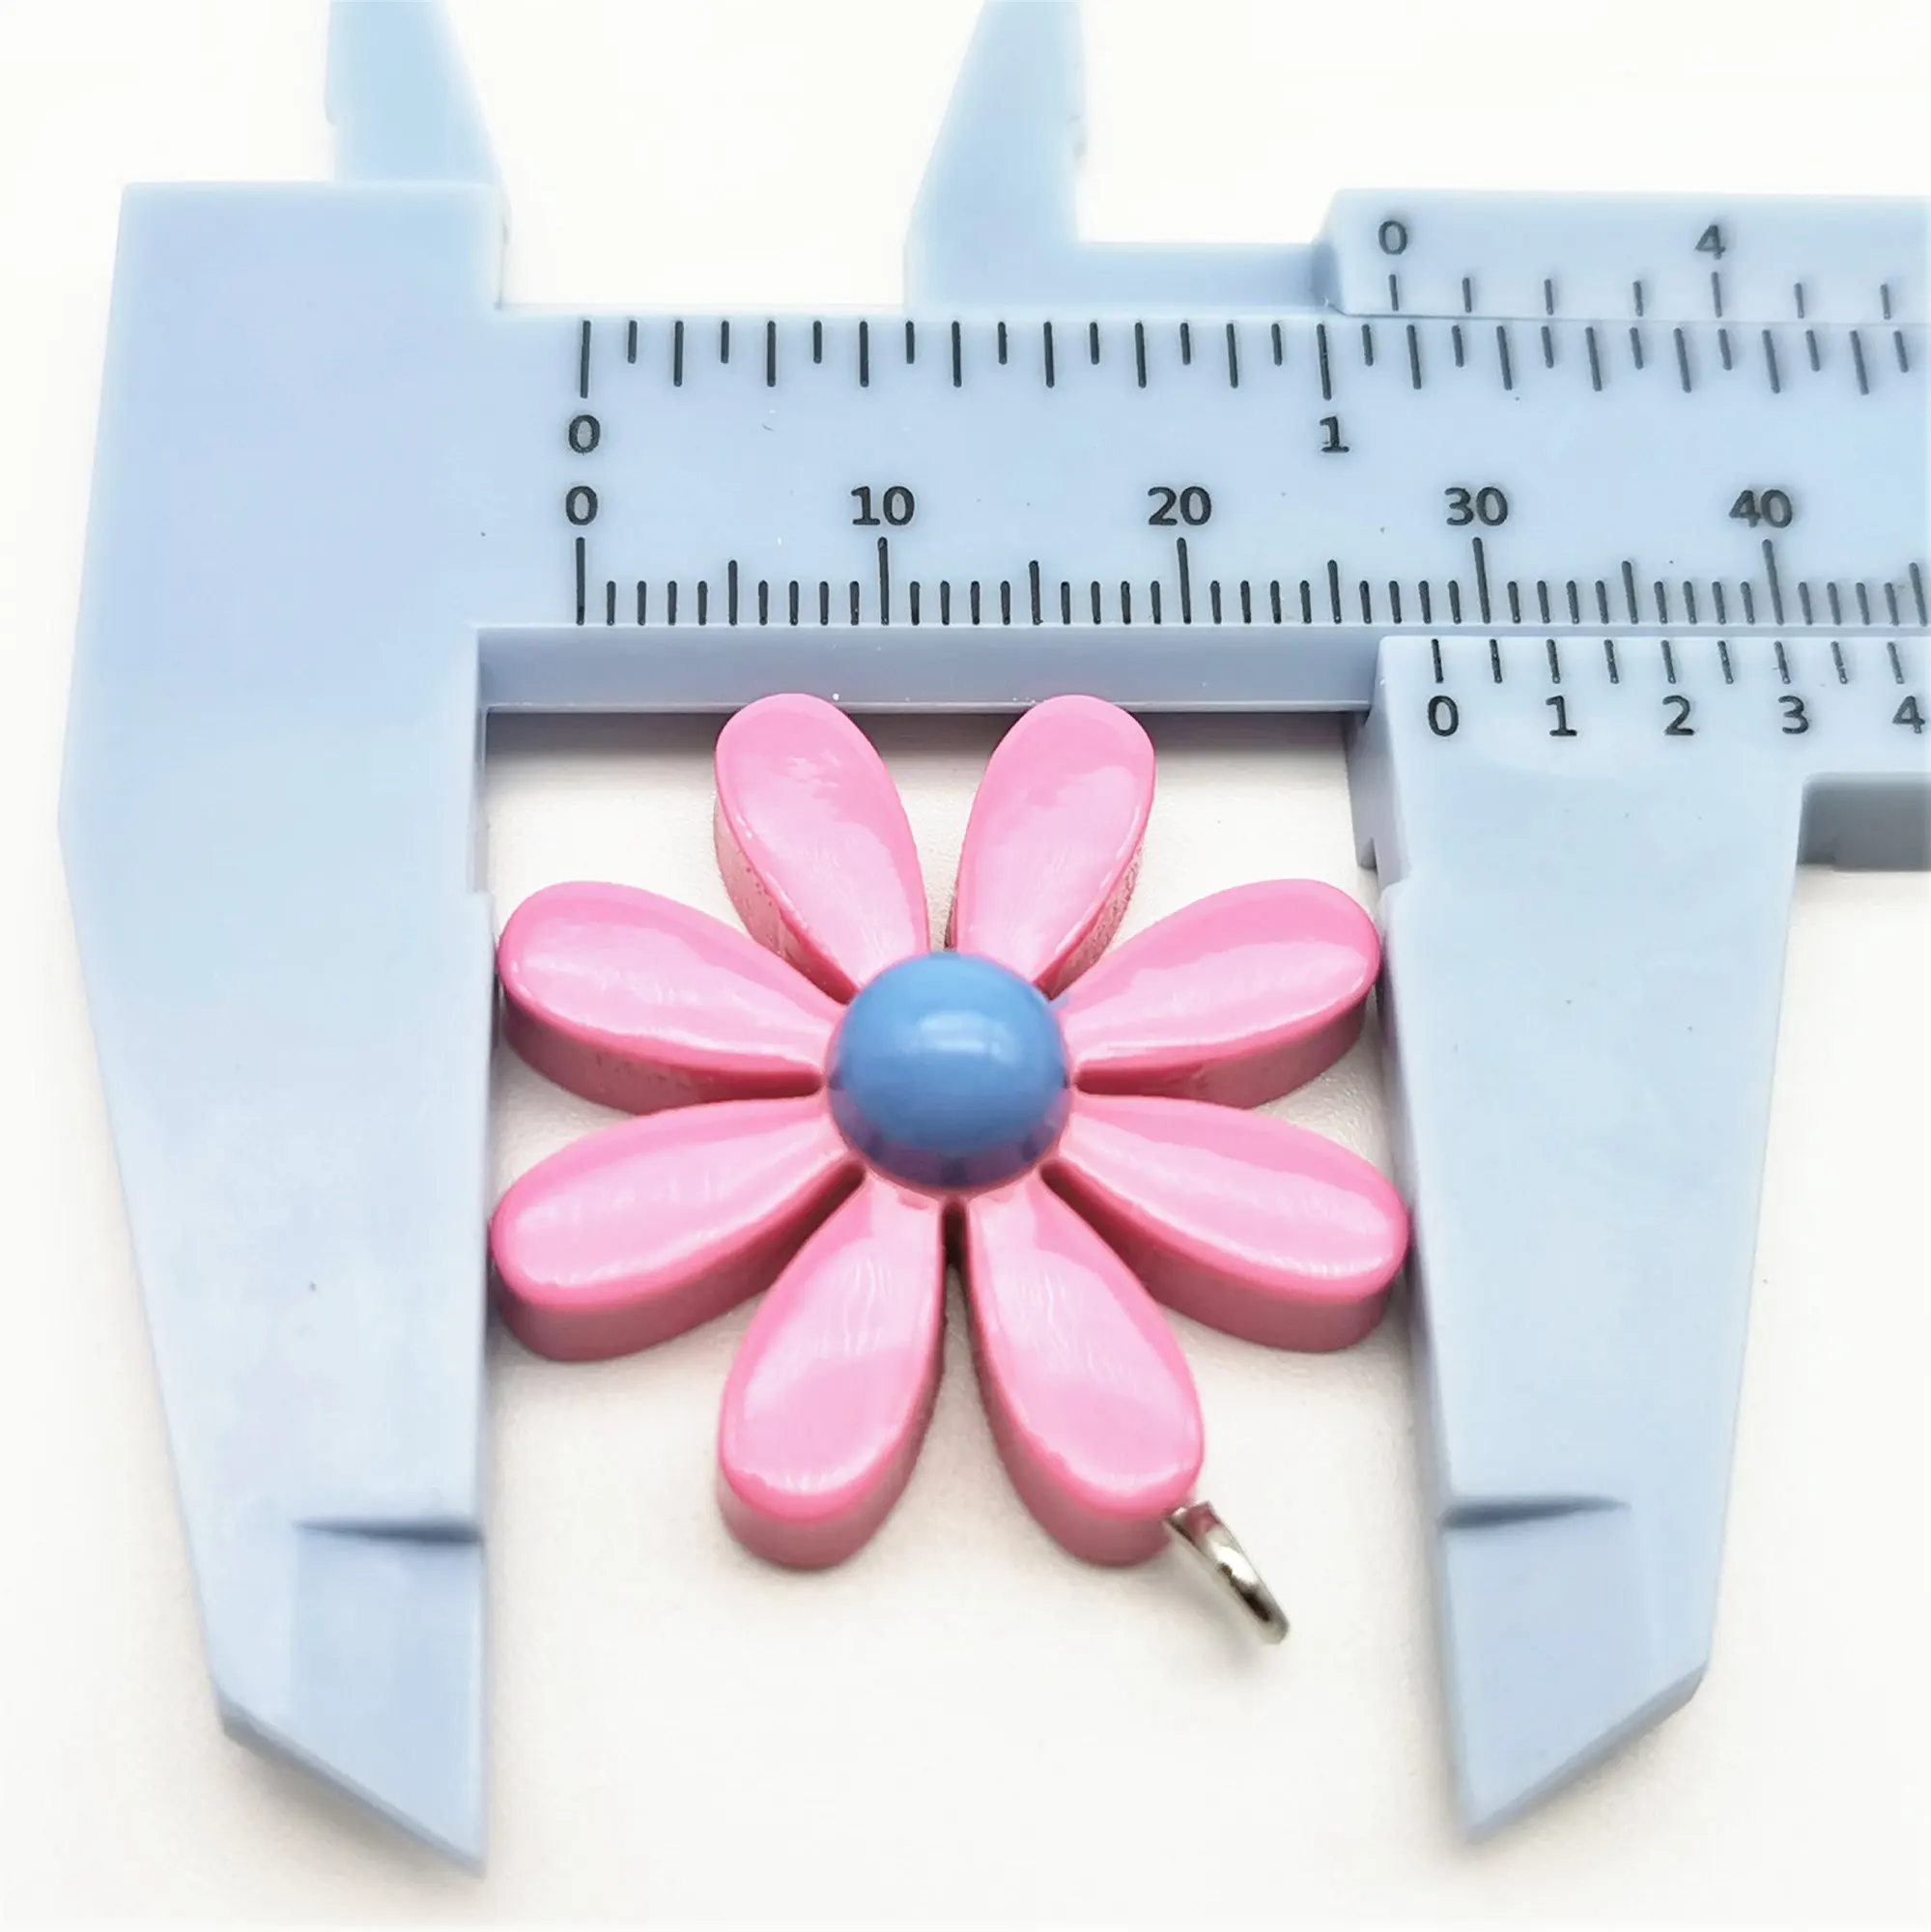 

6pcs Big Kawaii Resin Little Daisy Flower Charms Pendants For DIY Decoration Earrings Key Chains Fashion Jewelry Accessories